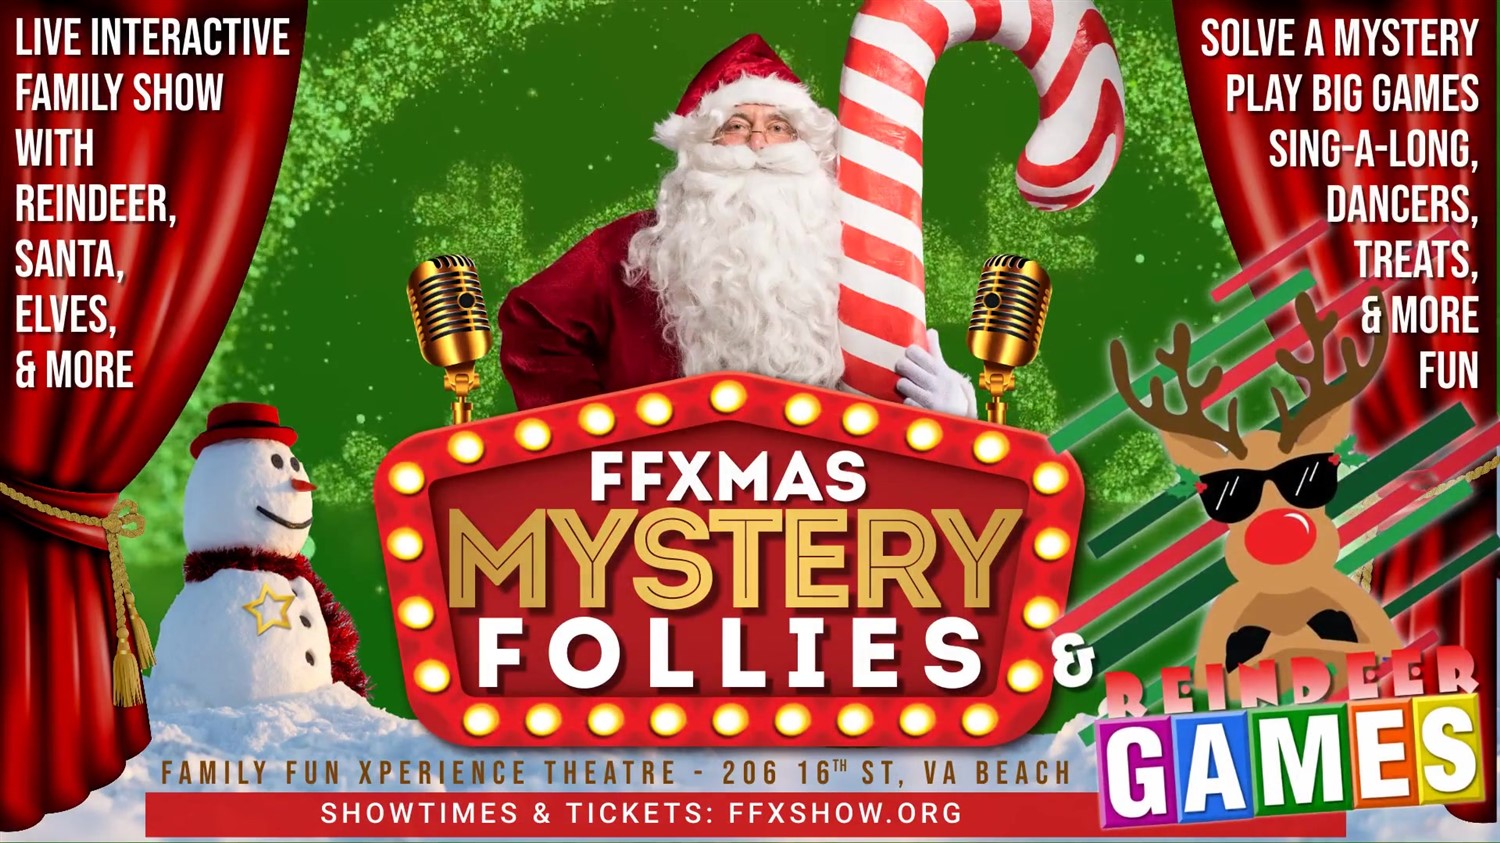 FFXmas MYSTERY FOLLIES Plus Bonus Reindeer Games on Dec 23, 19:00@FFX Theatre - Pick a seat, Buy tickets and Get information on Family Fun Xperience tickets.ffxshow.org